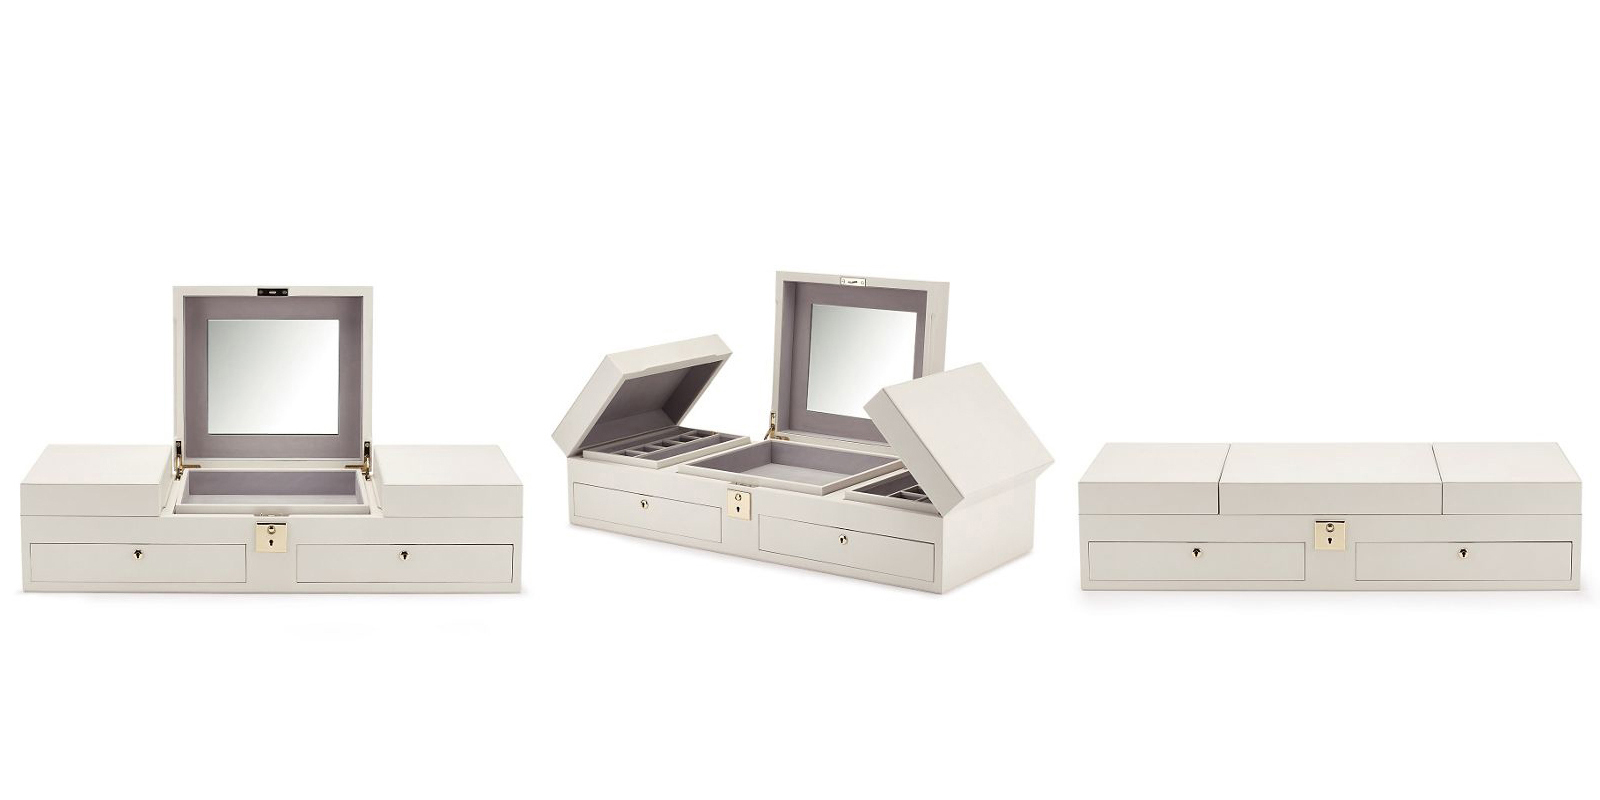 Smythson ‘Grosvenor’ table top jewellery box in calf leather and nubuck suede